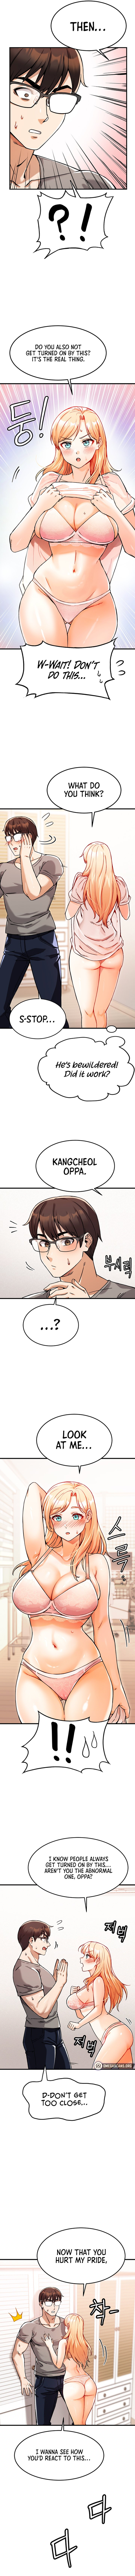 Kangcheol’s Bosses Chapter 2 - Page 8